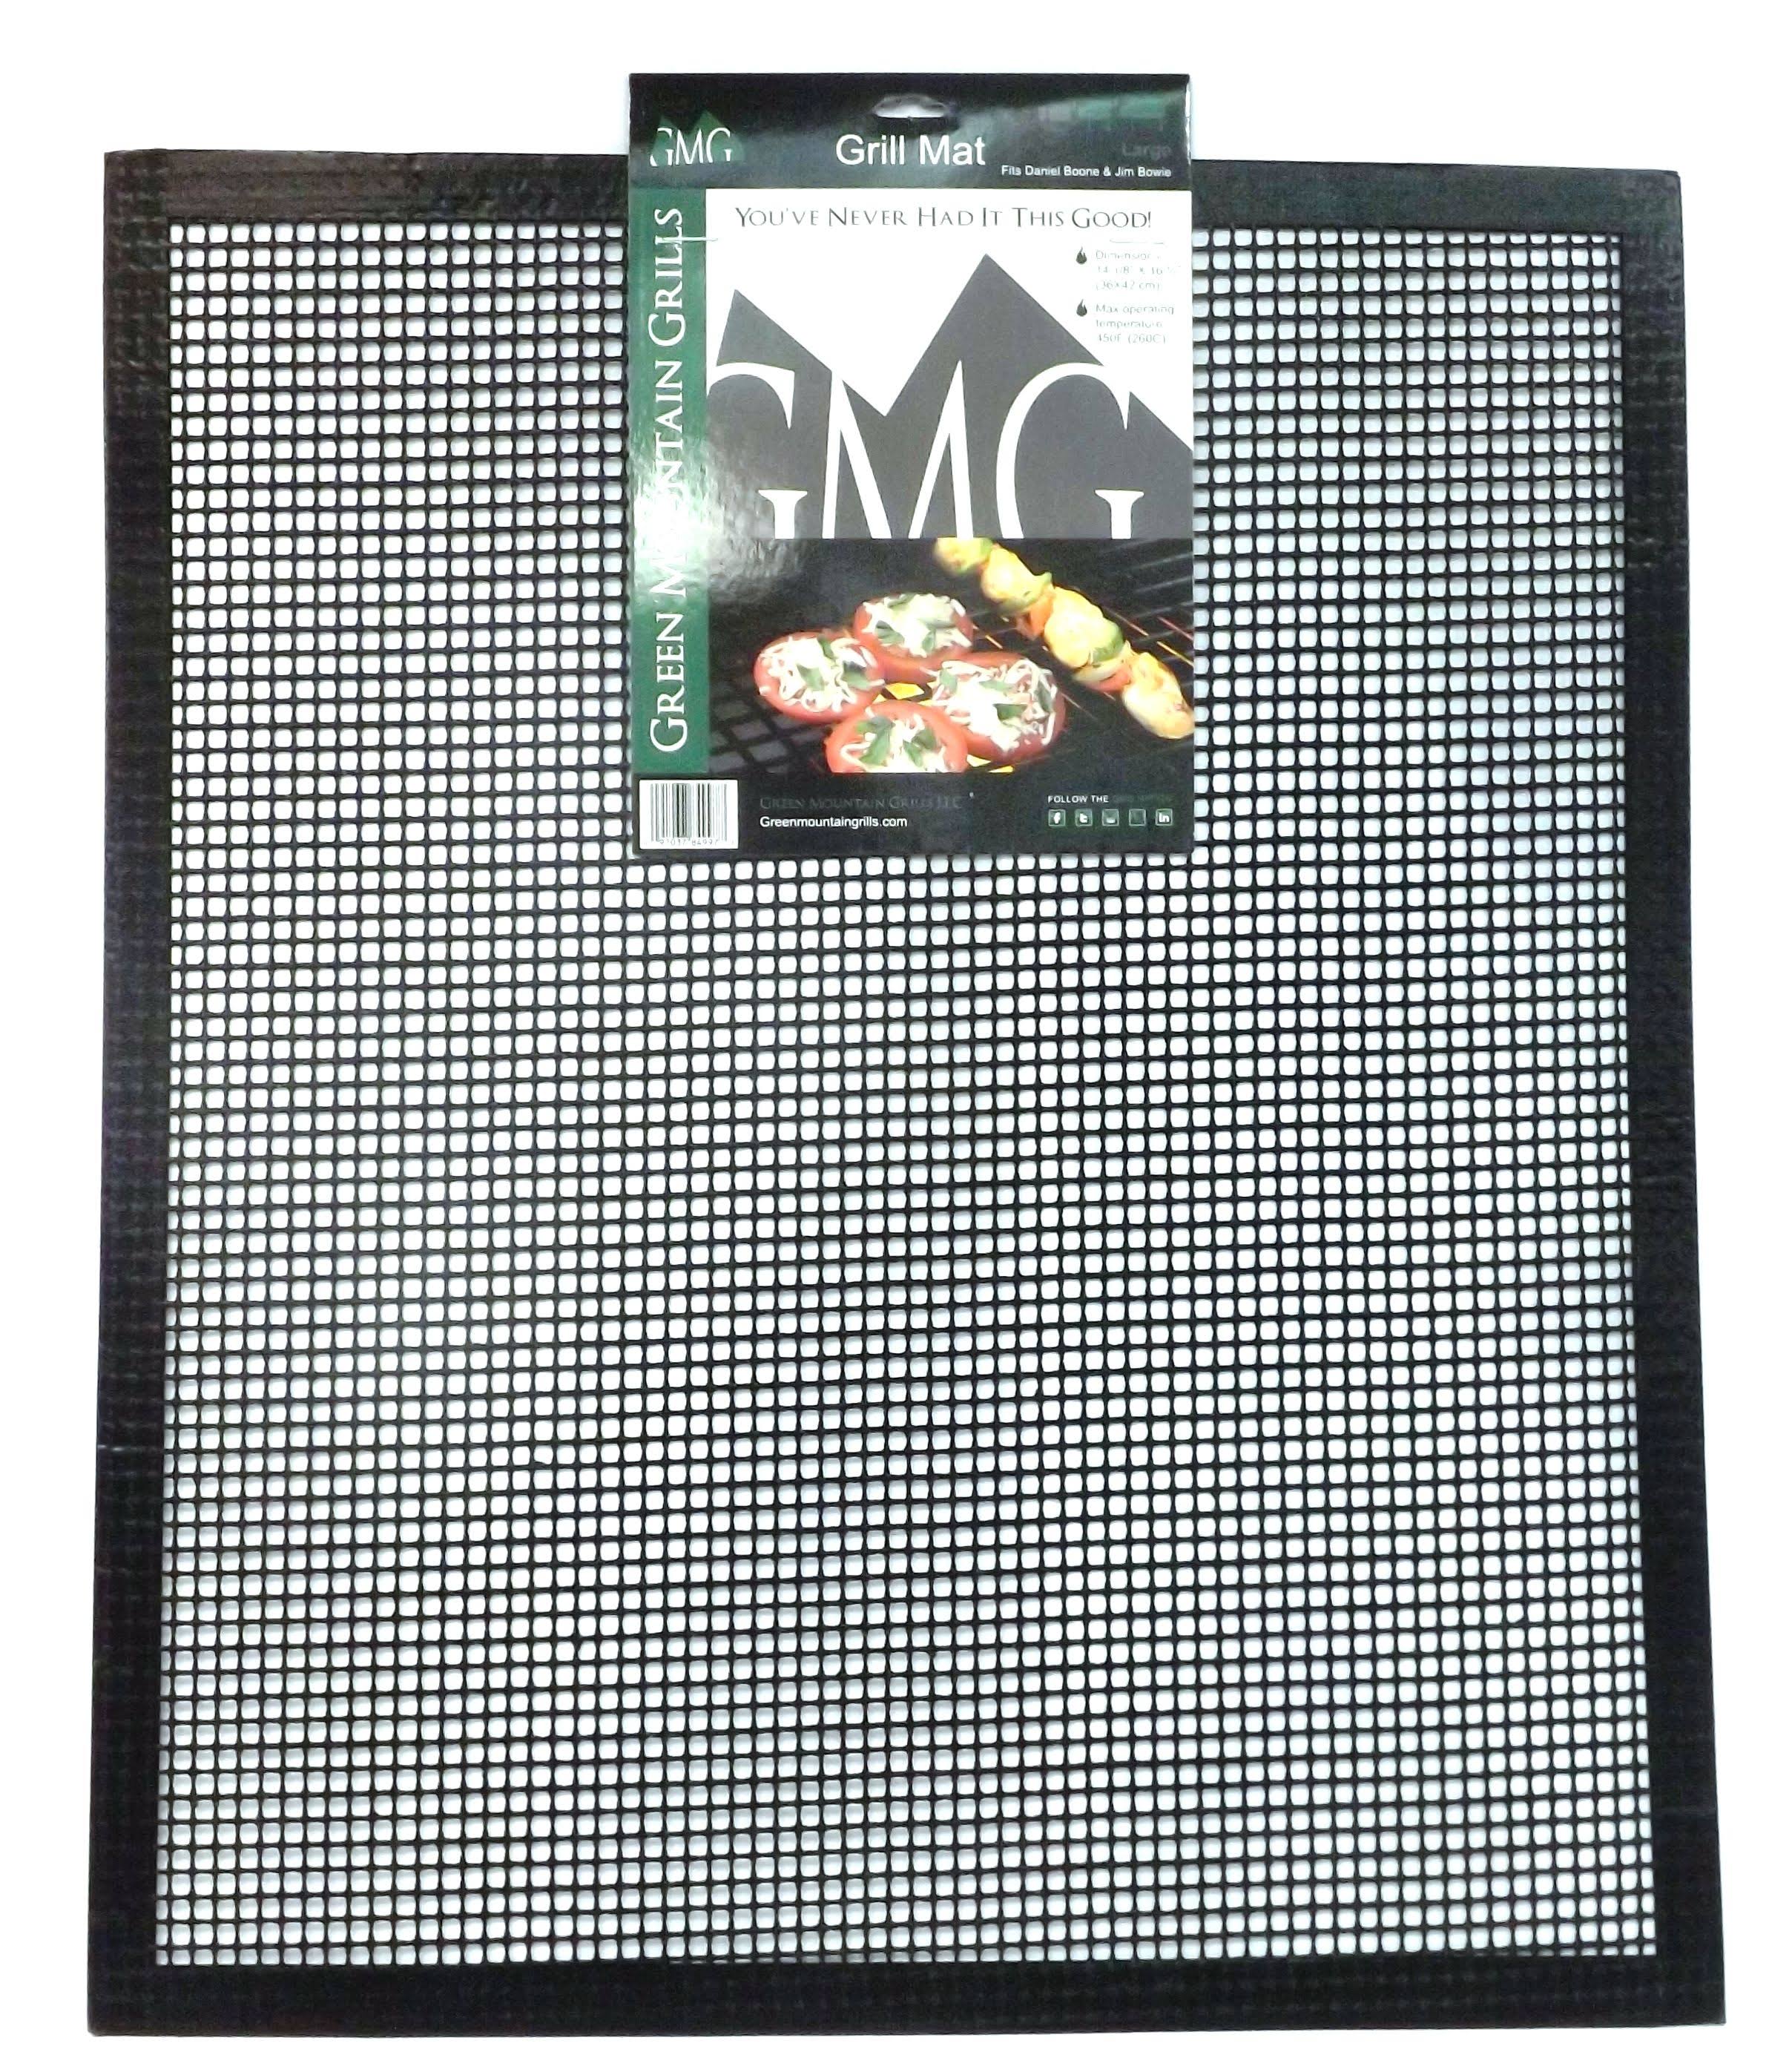 GMG GMG-4018 Large Grilling Mat, 14 1/8 x 16 1/2 inches